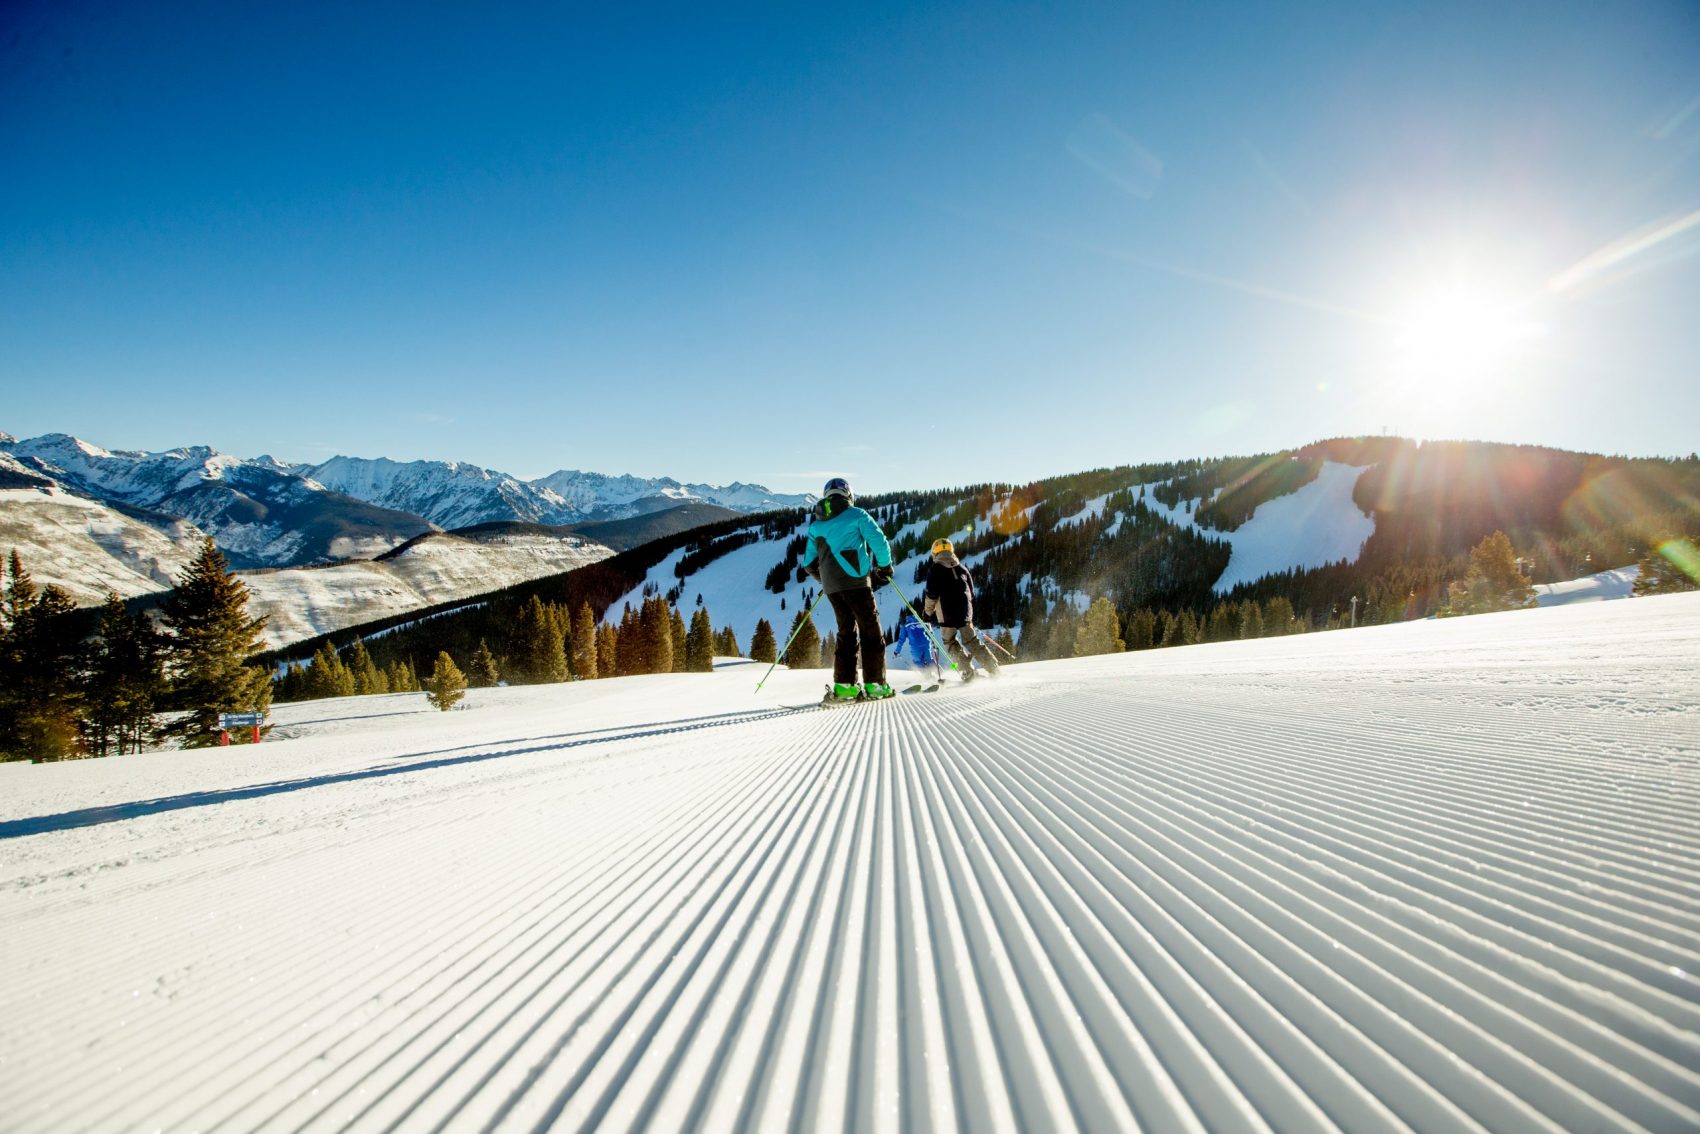 Kids Ski School at Vail, CO. Photo: Daniel Milchev. Vail Resorts. The Must-Read Guide to Vail.